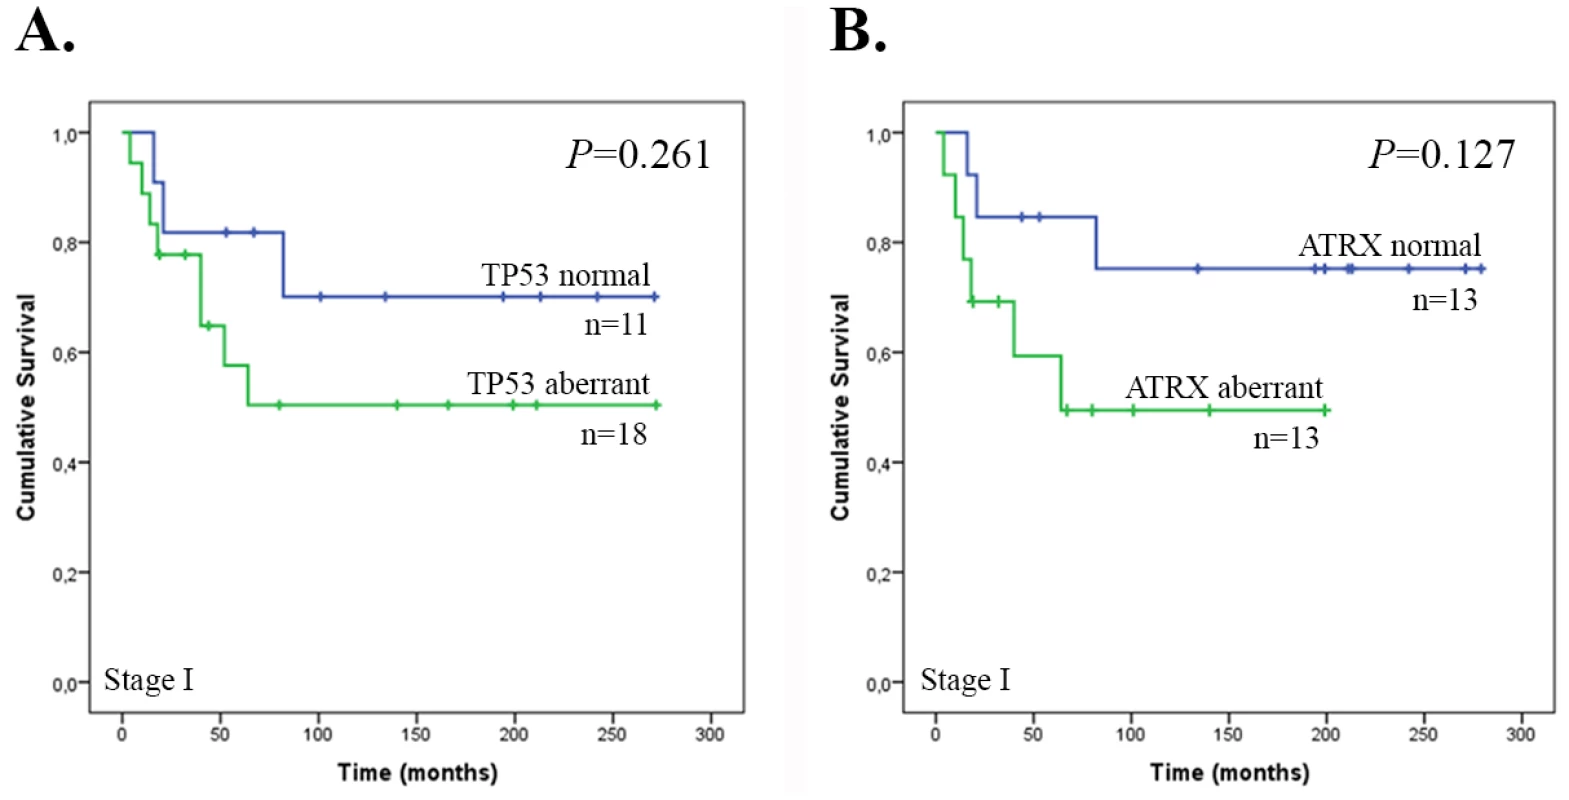 Overall survival of patients with Stage I ULMS according to TP53 and ATRX expression status.